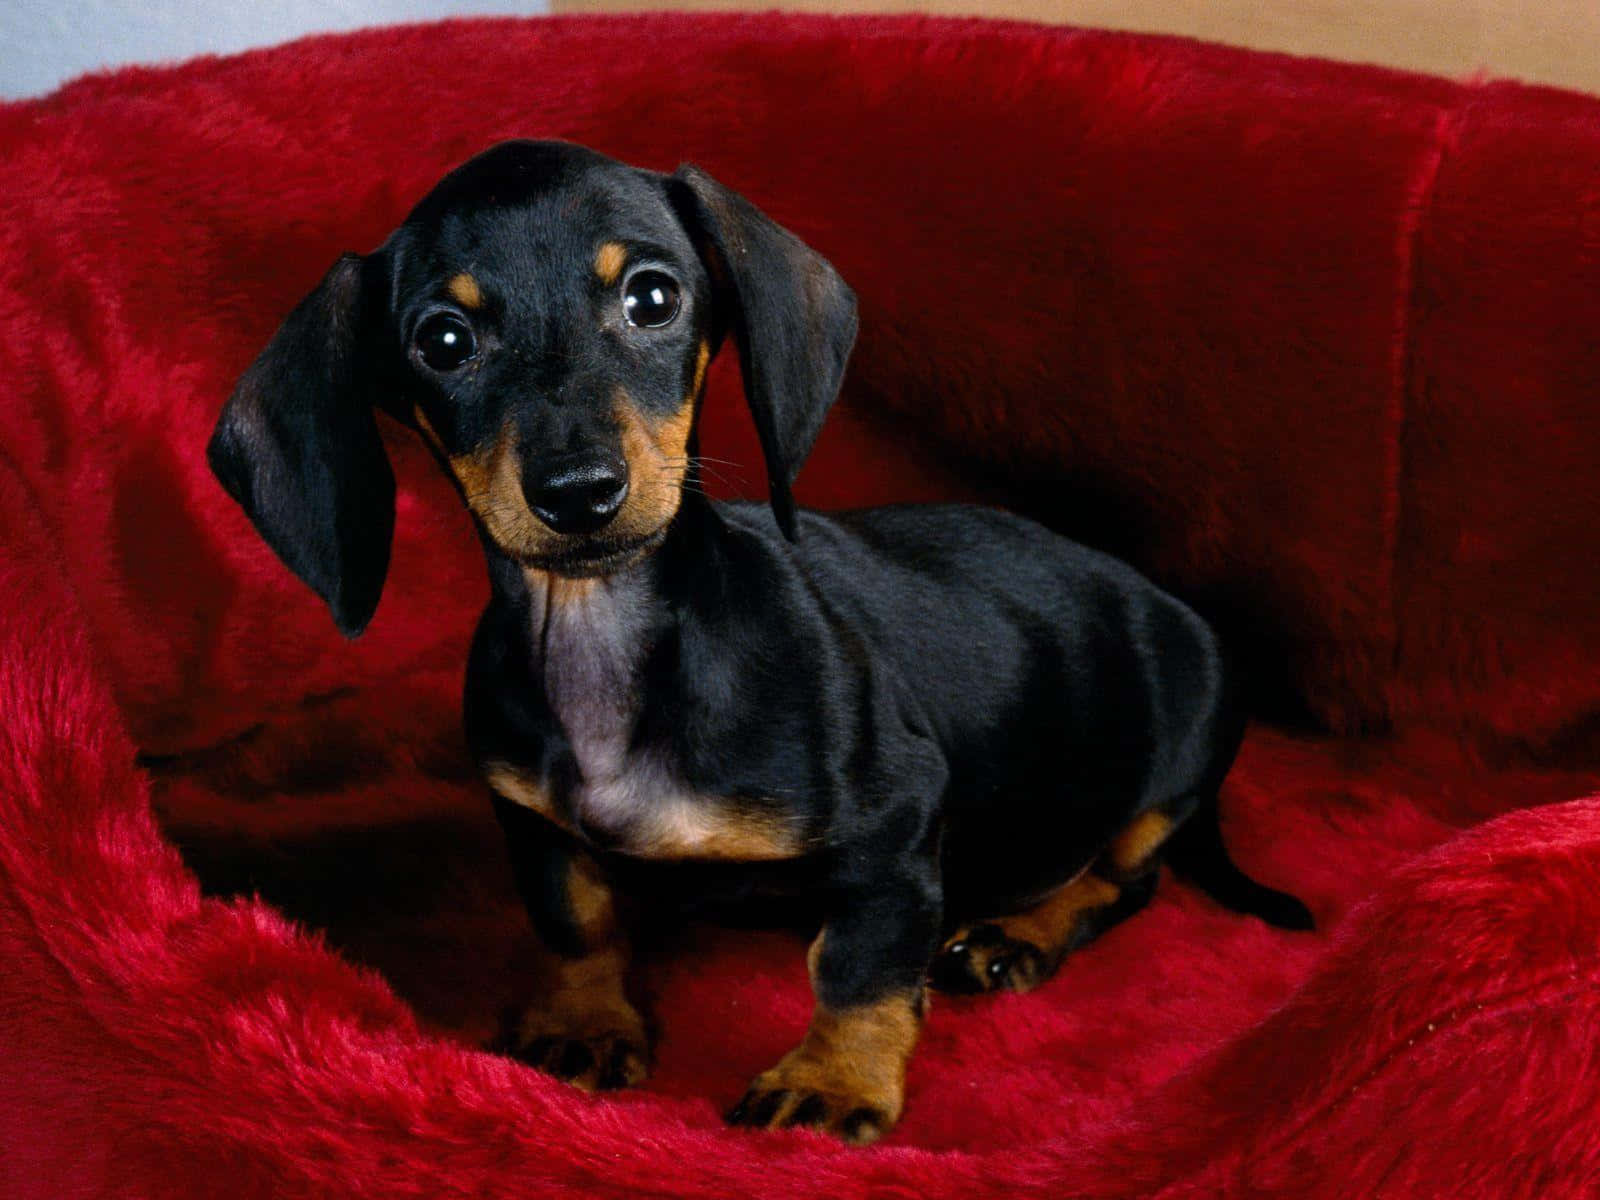 A Bright Eyed Dachshund Happily Awaiting Its Next Adventure. Wallpaper